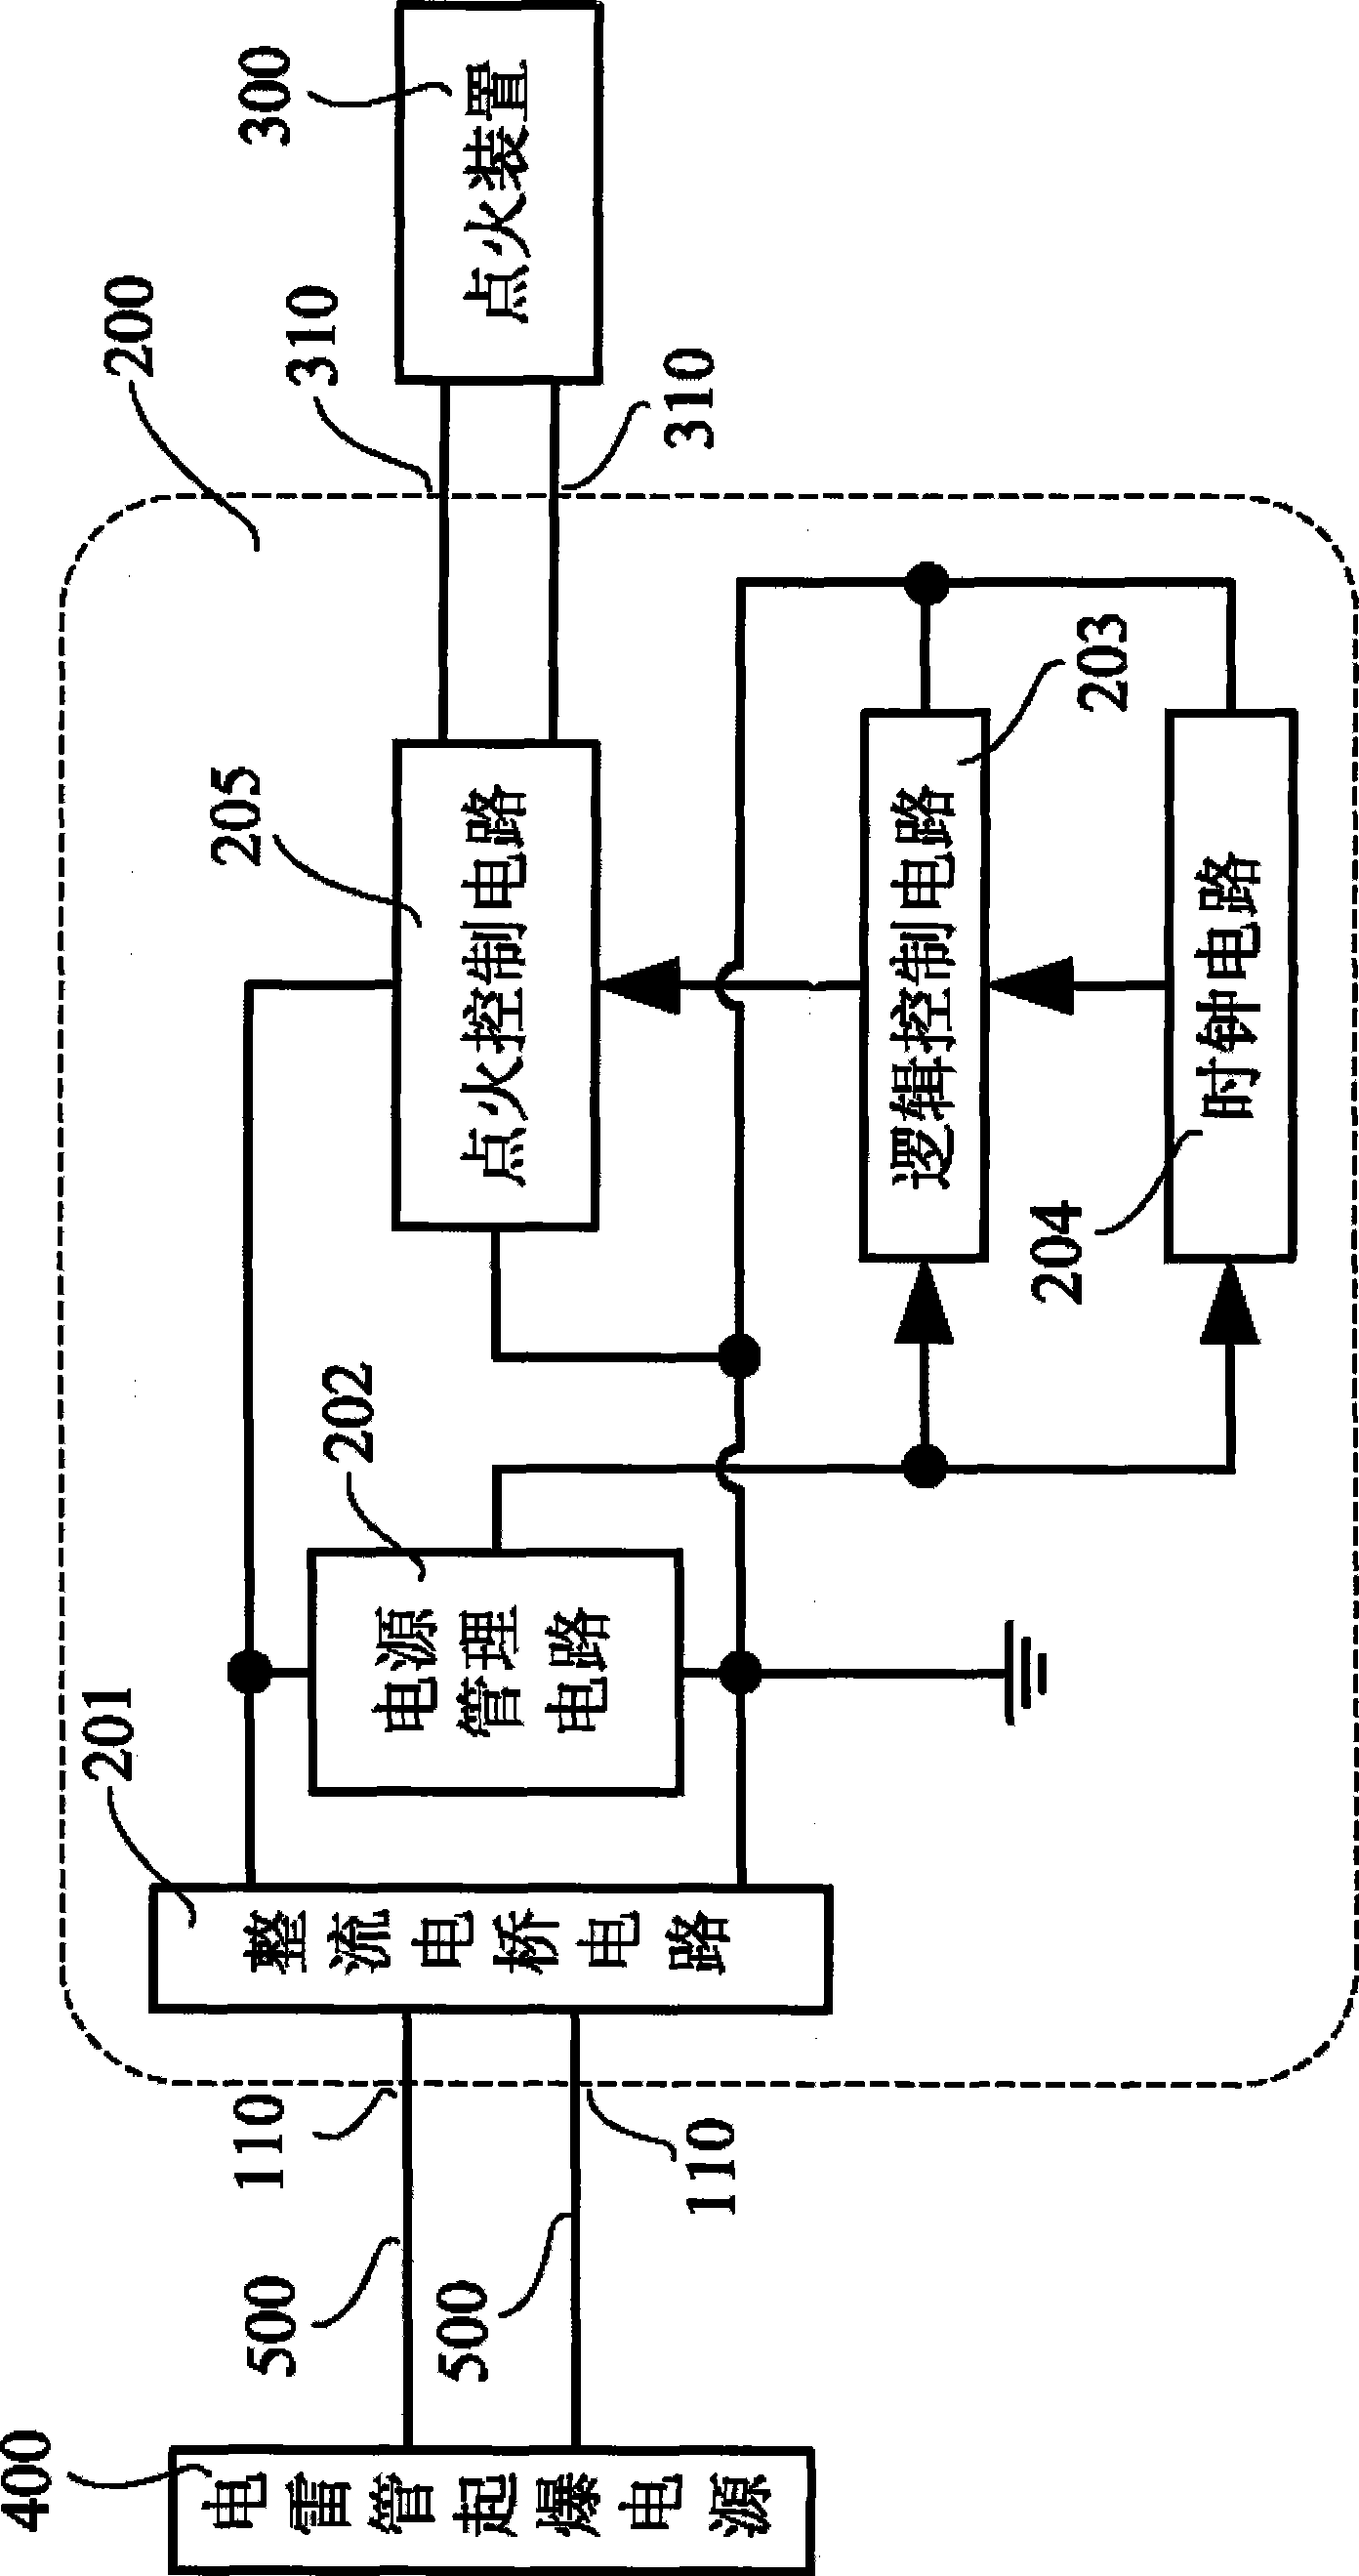 Ignition control apparatus and its control process